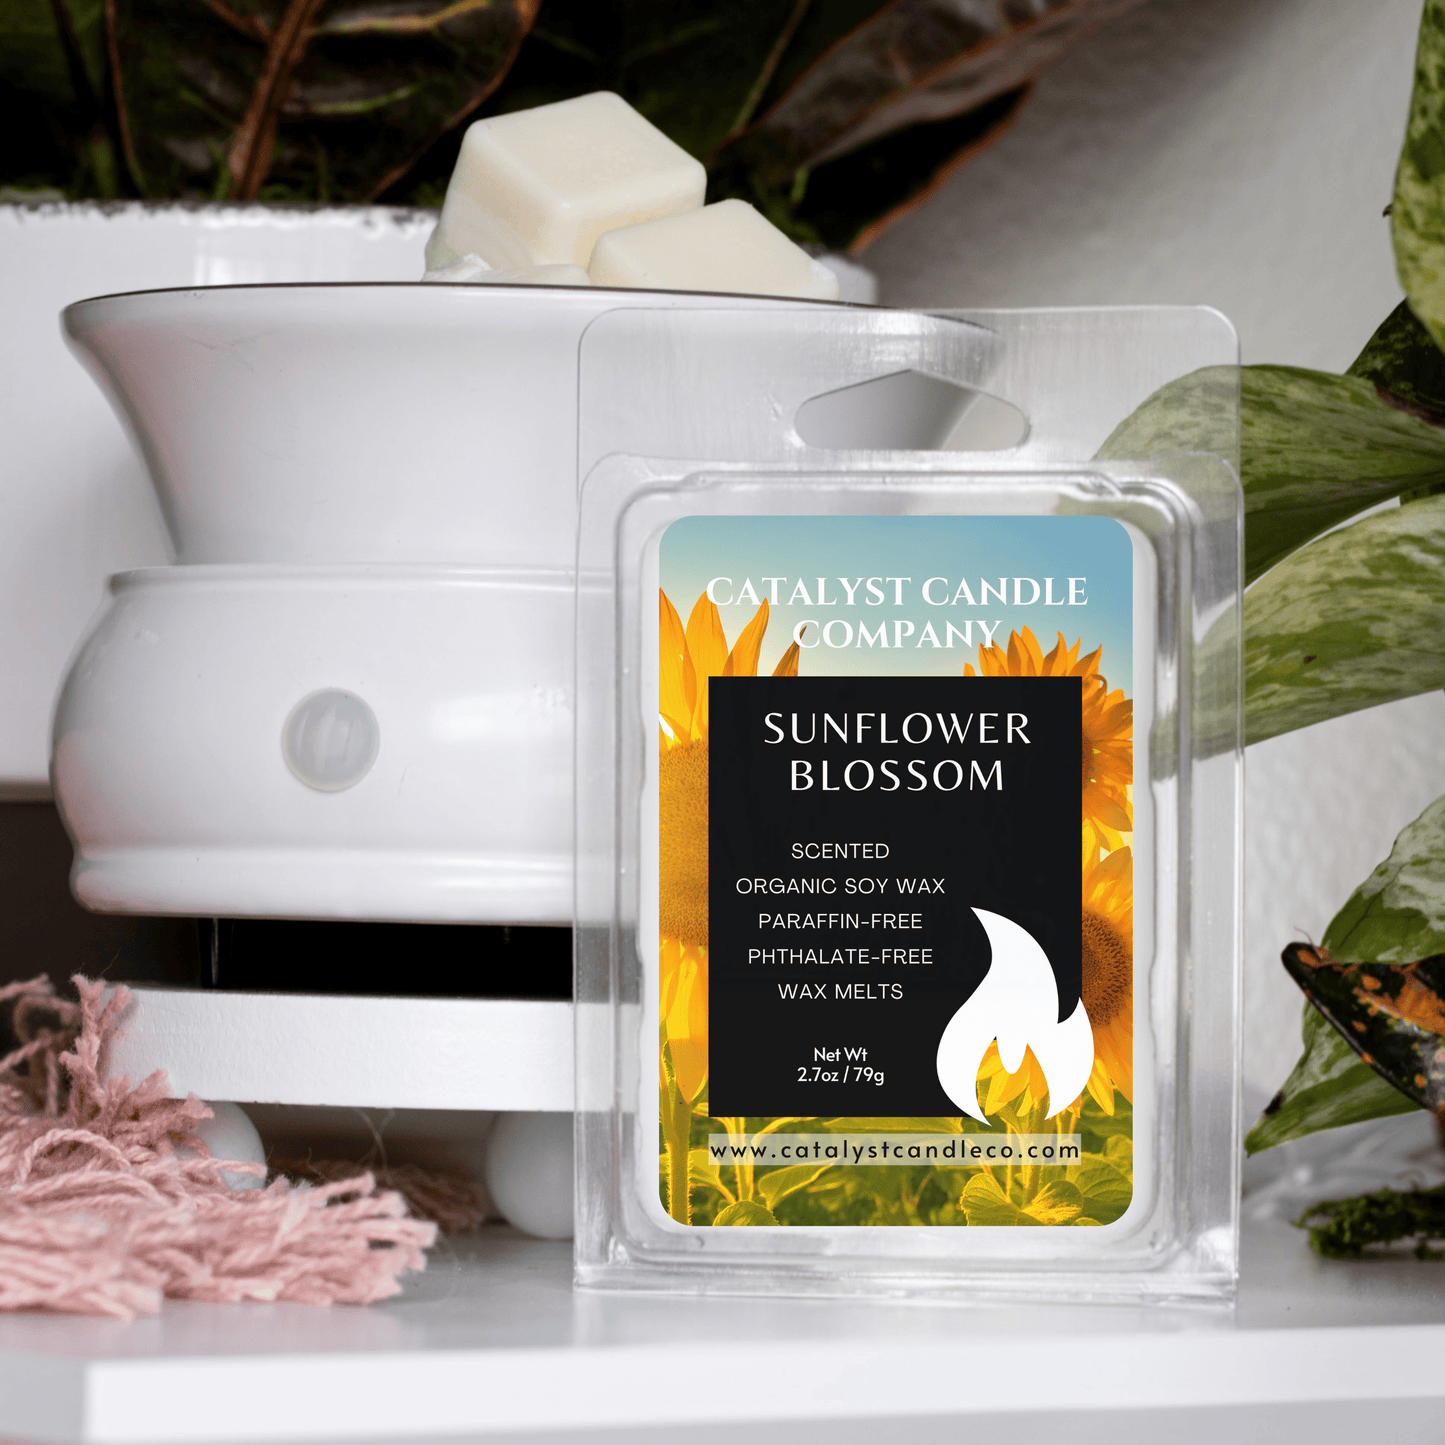 perfume aroma. Sunflower Blossom scented soy wax melts. Organic soy wax tarts. Catalyst Candle Company LLC